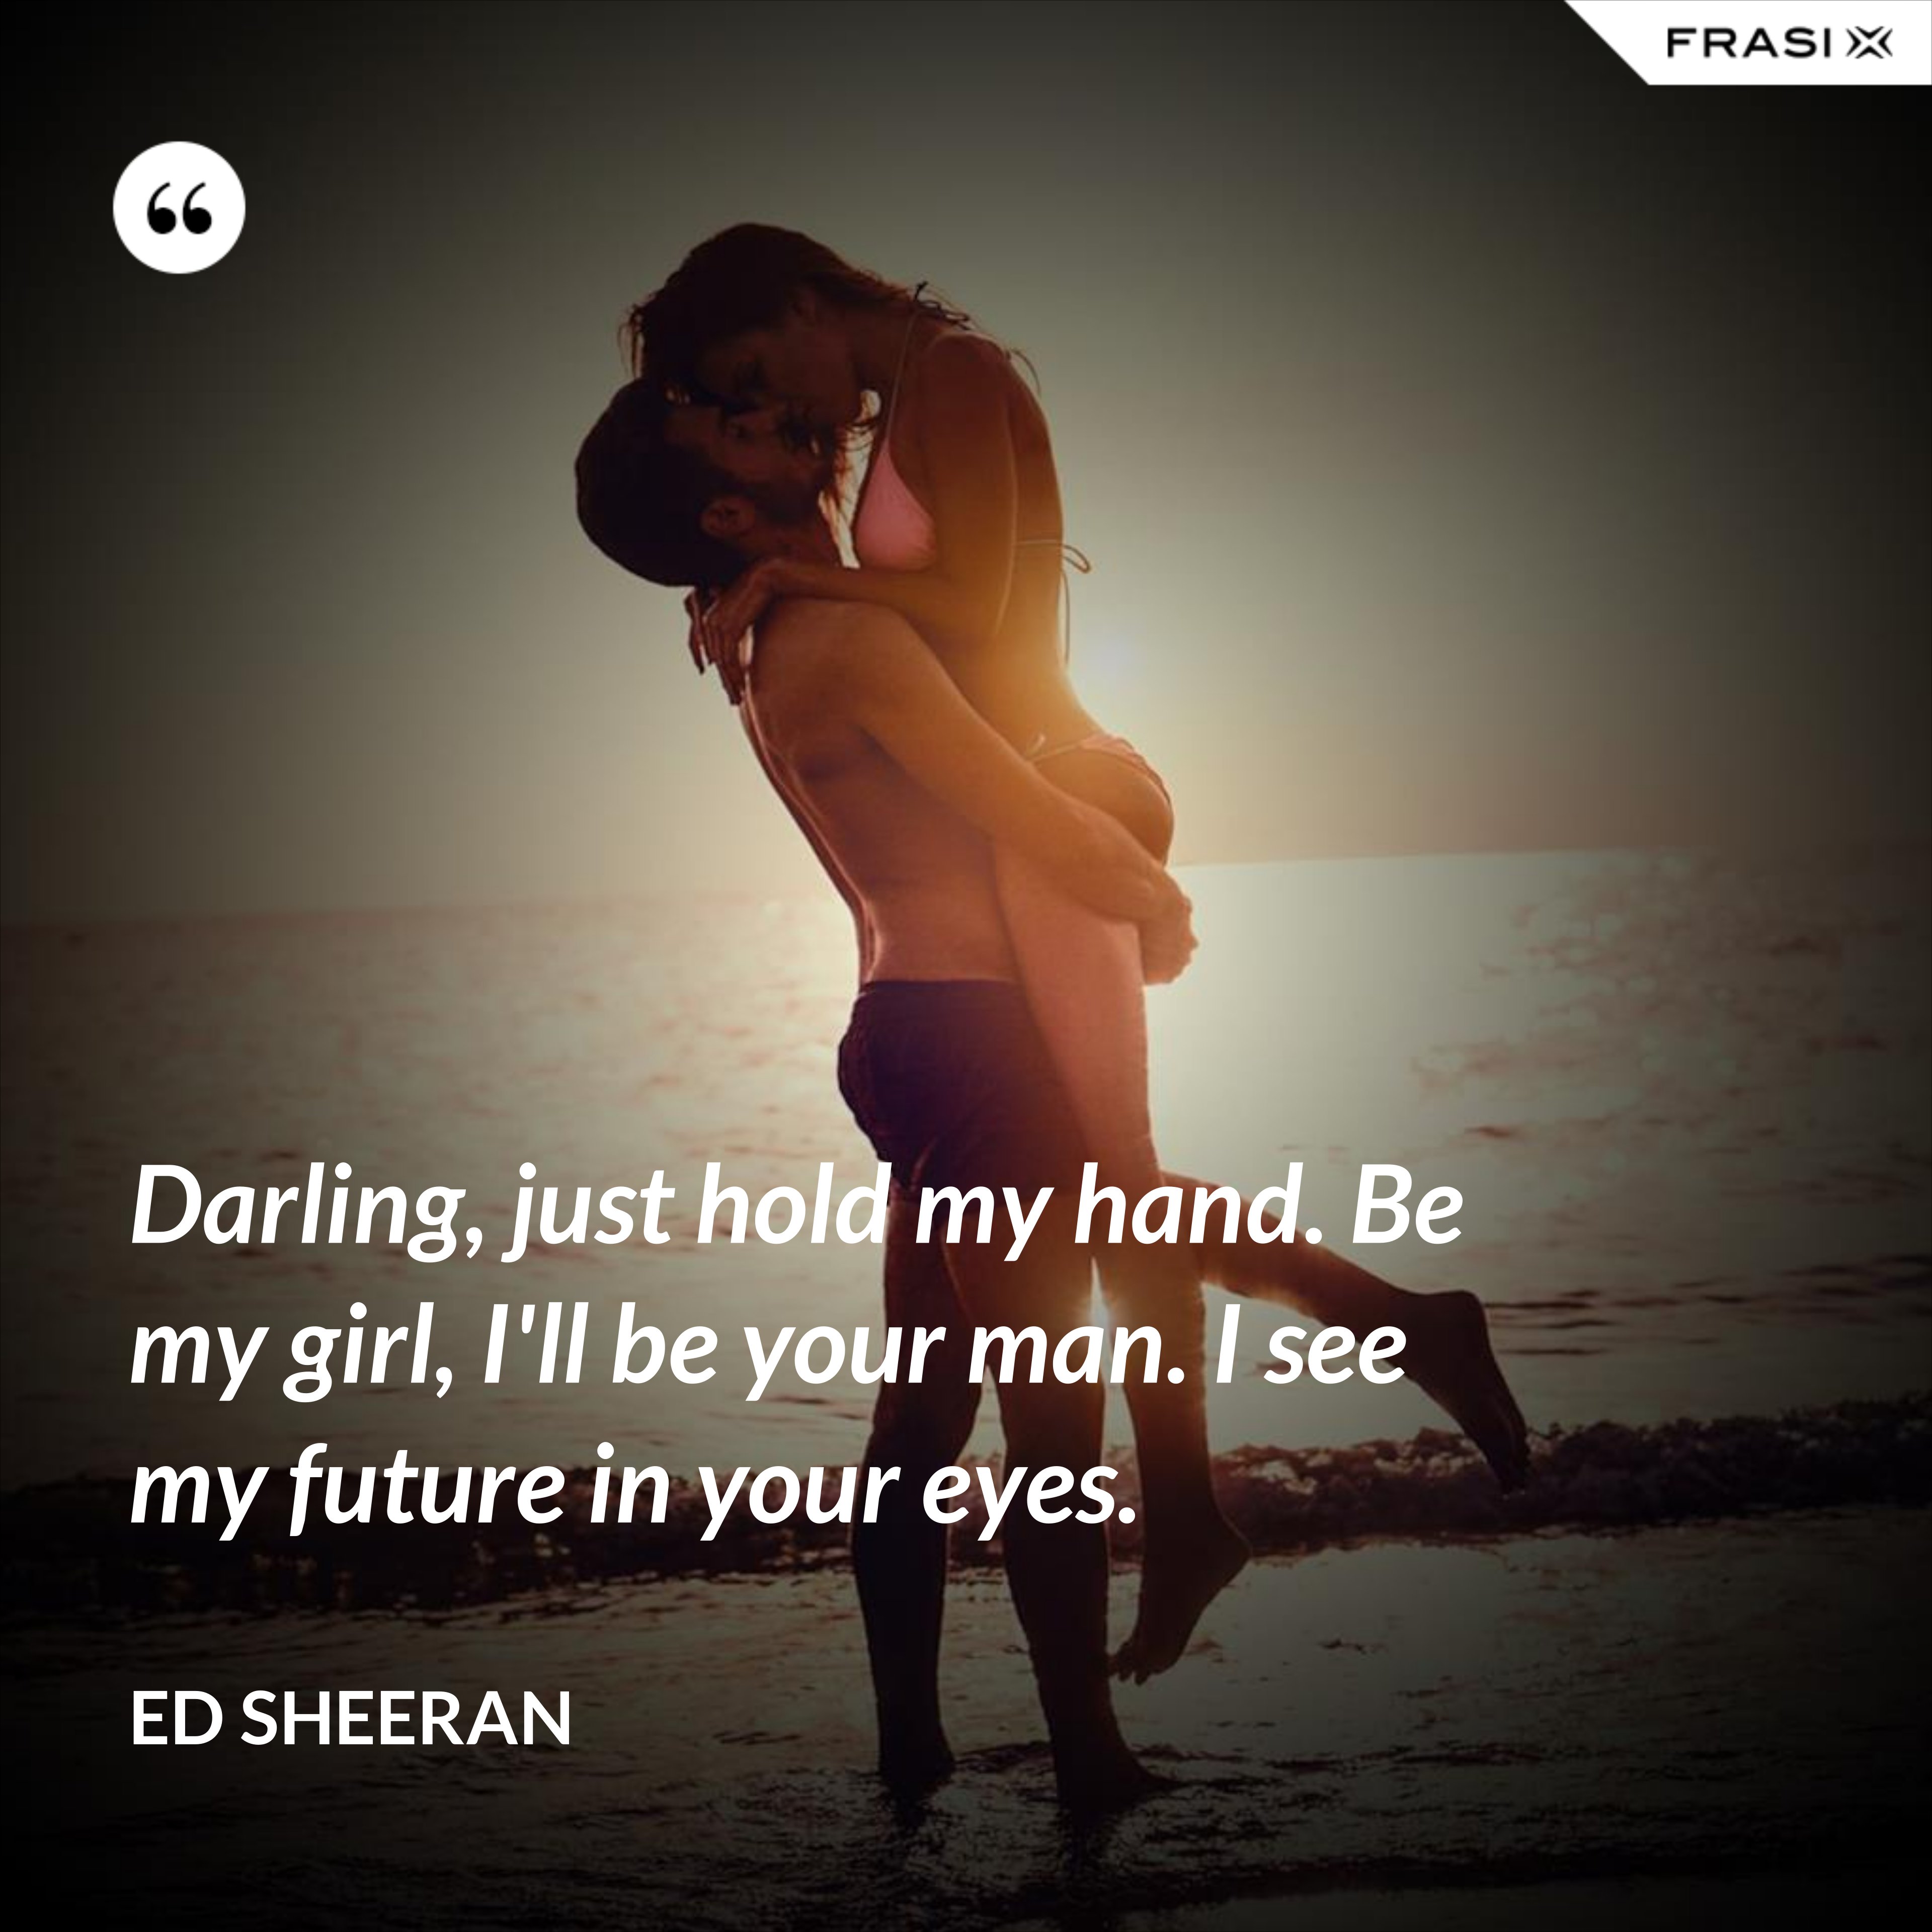 Darling, just hold my hand. Be my girl, I'll be your man. I see my future in your eyes. - Ed Sheeran